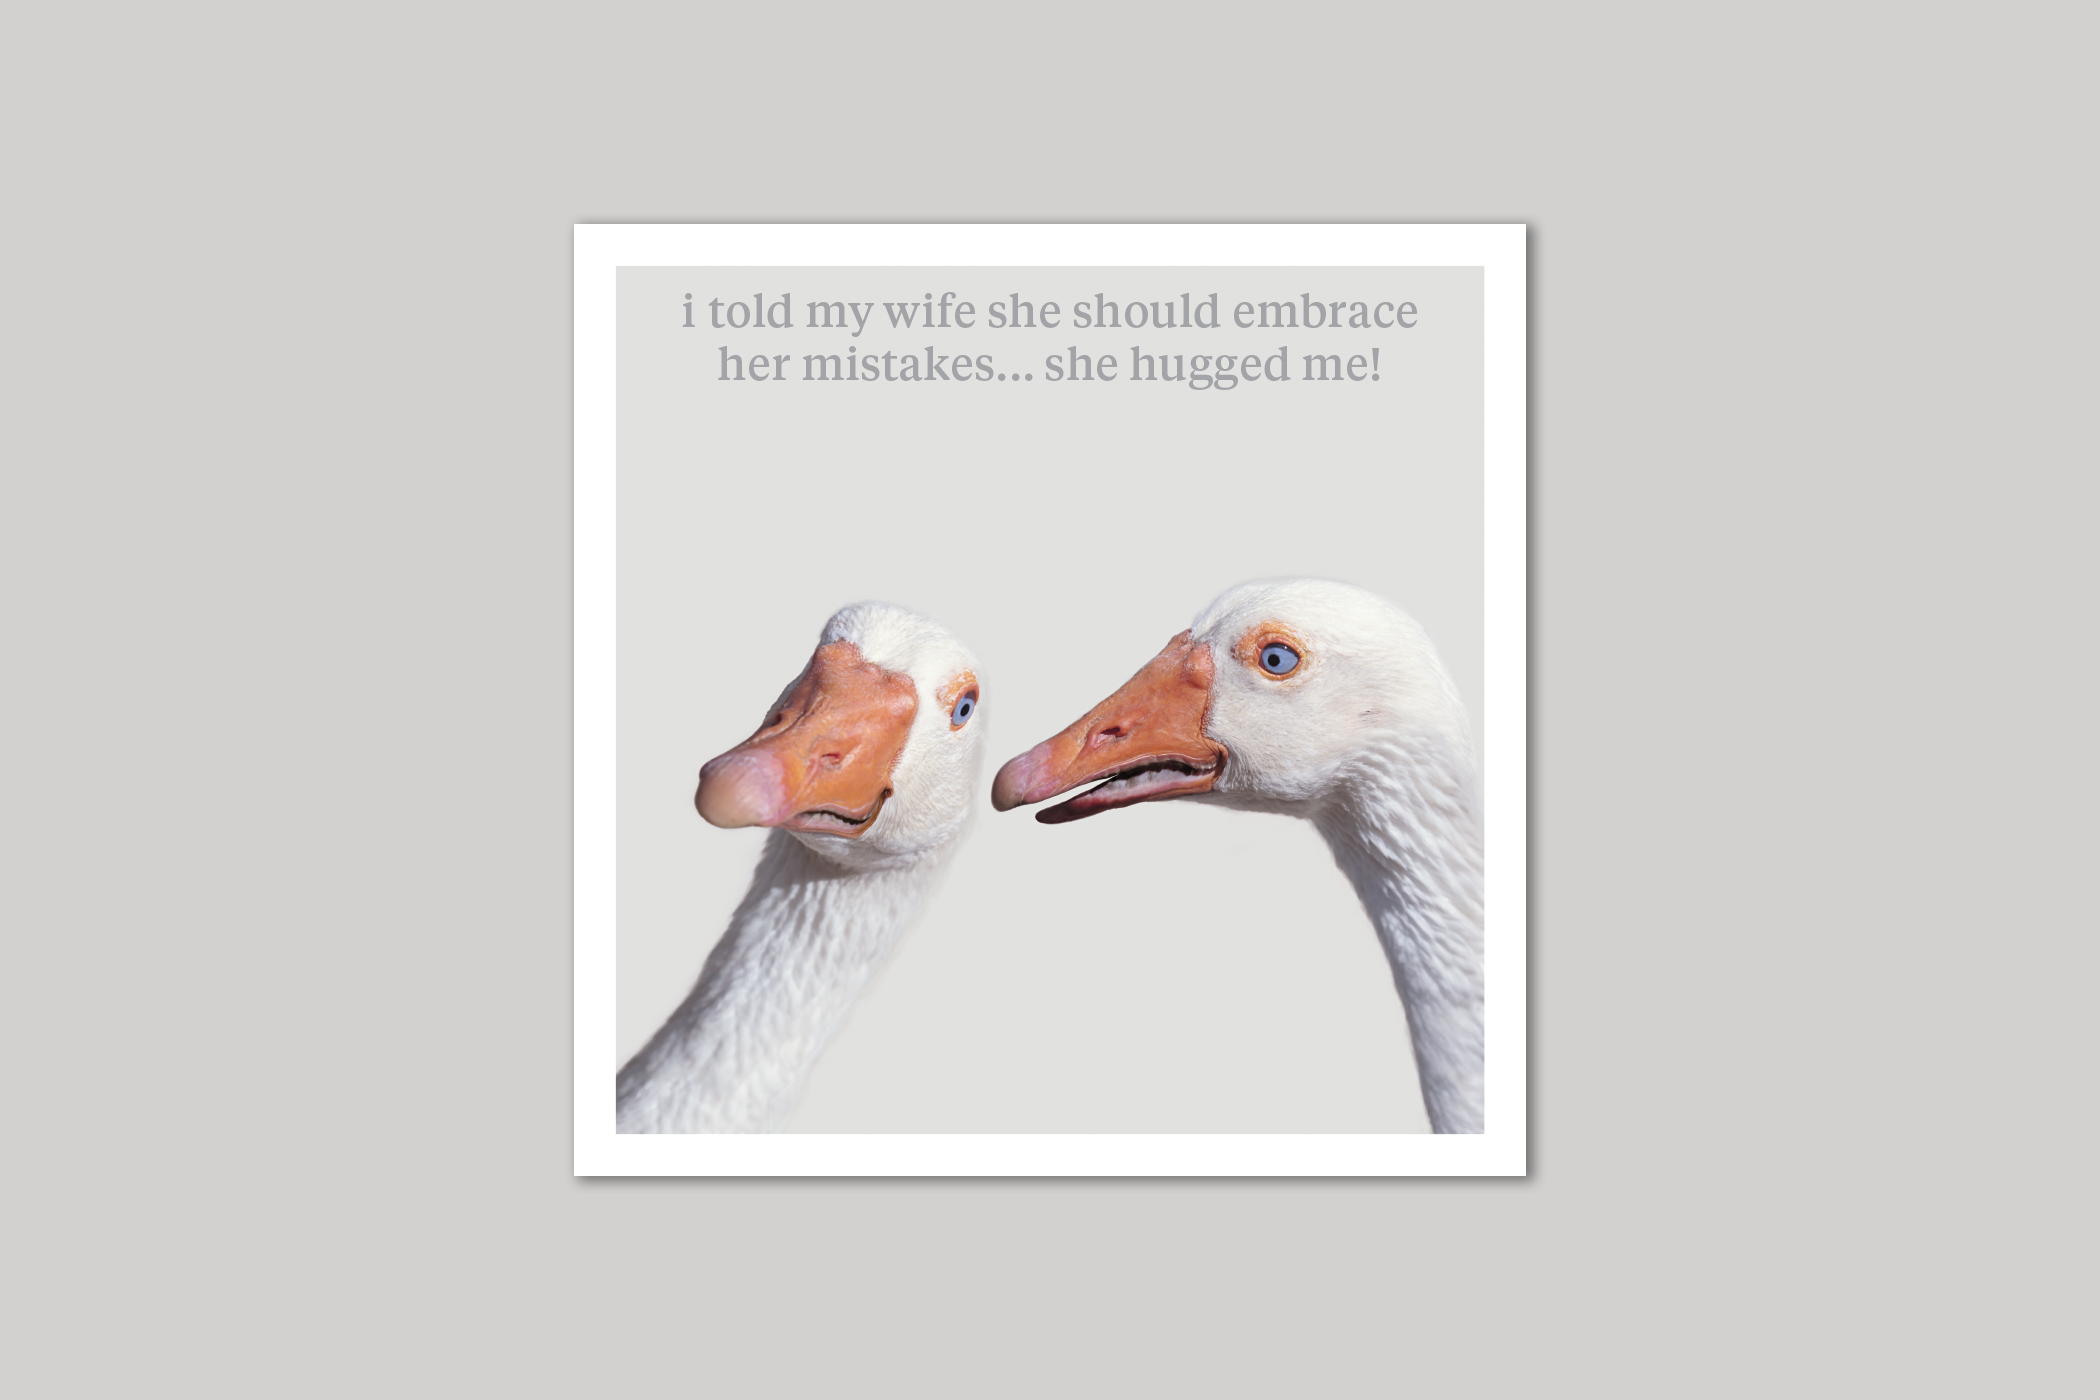 She Hugged Me quirky animal portrait from Curious World range of greeting cards by Icon.